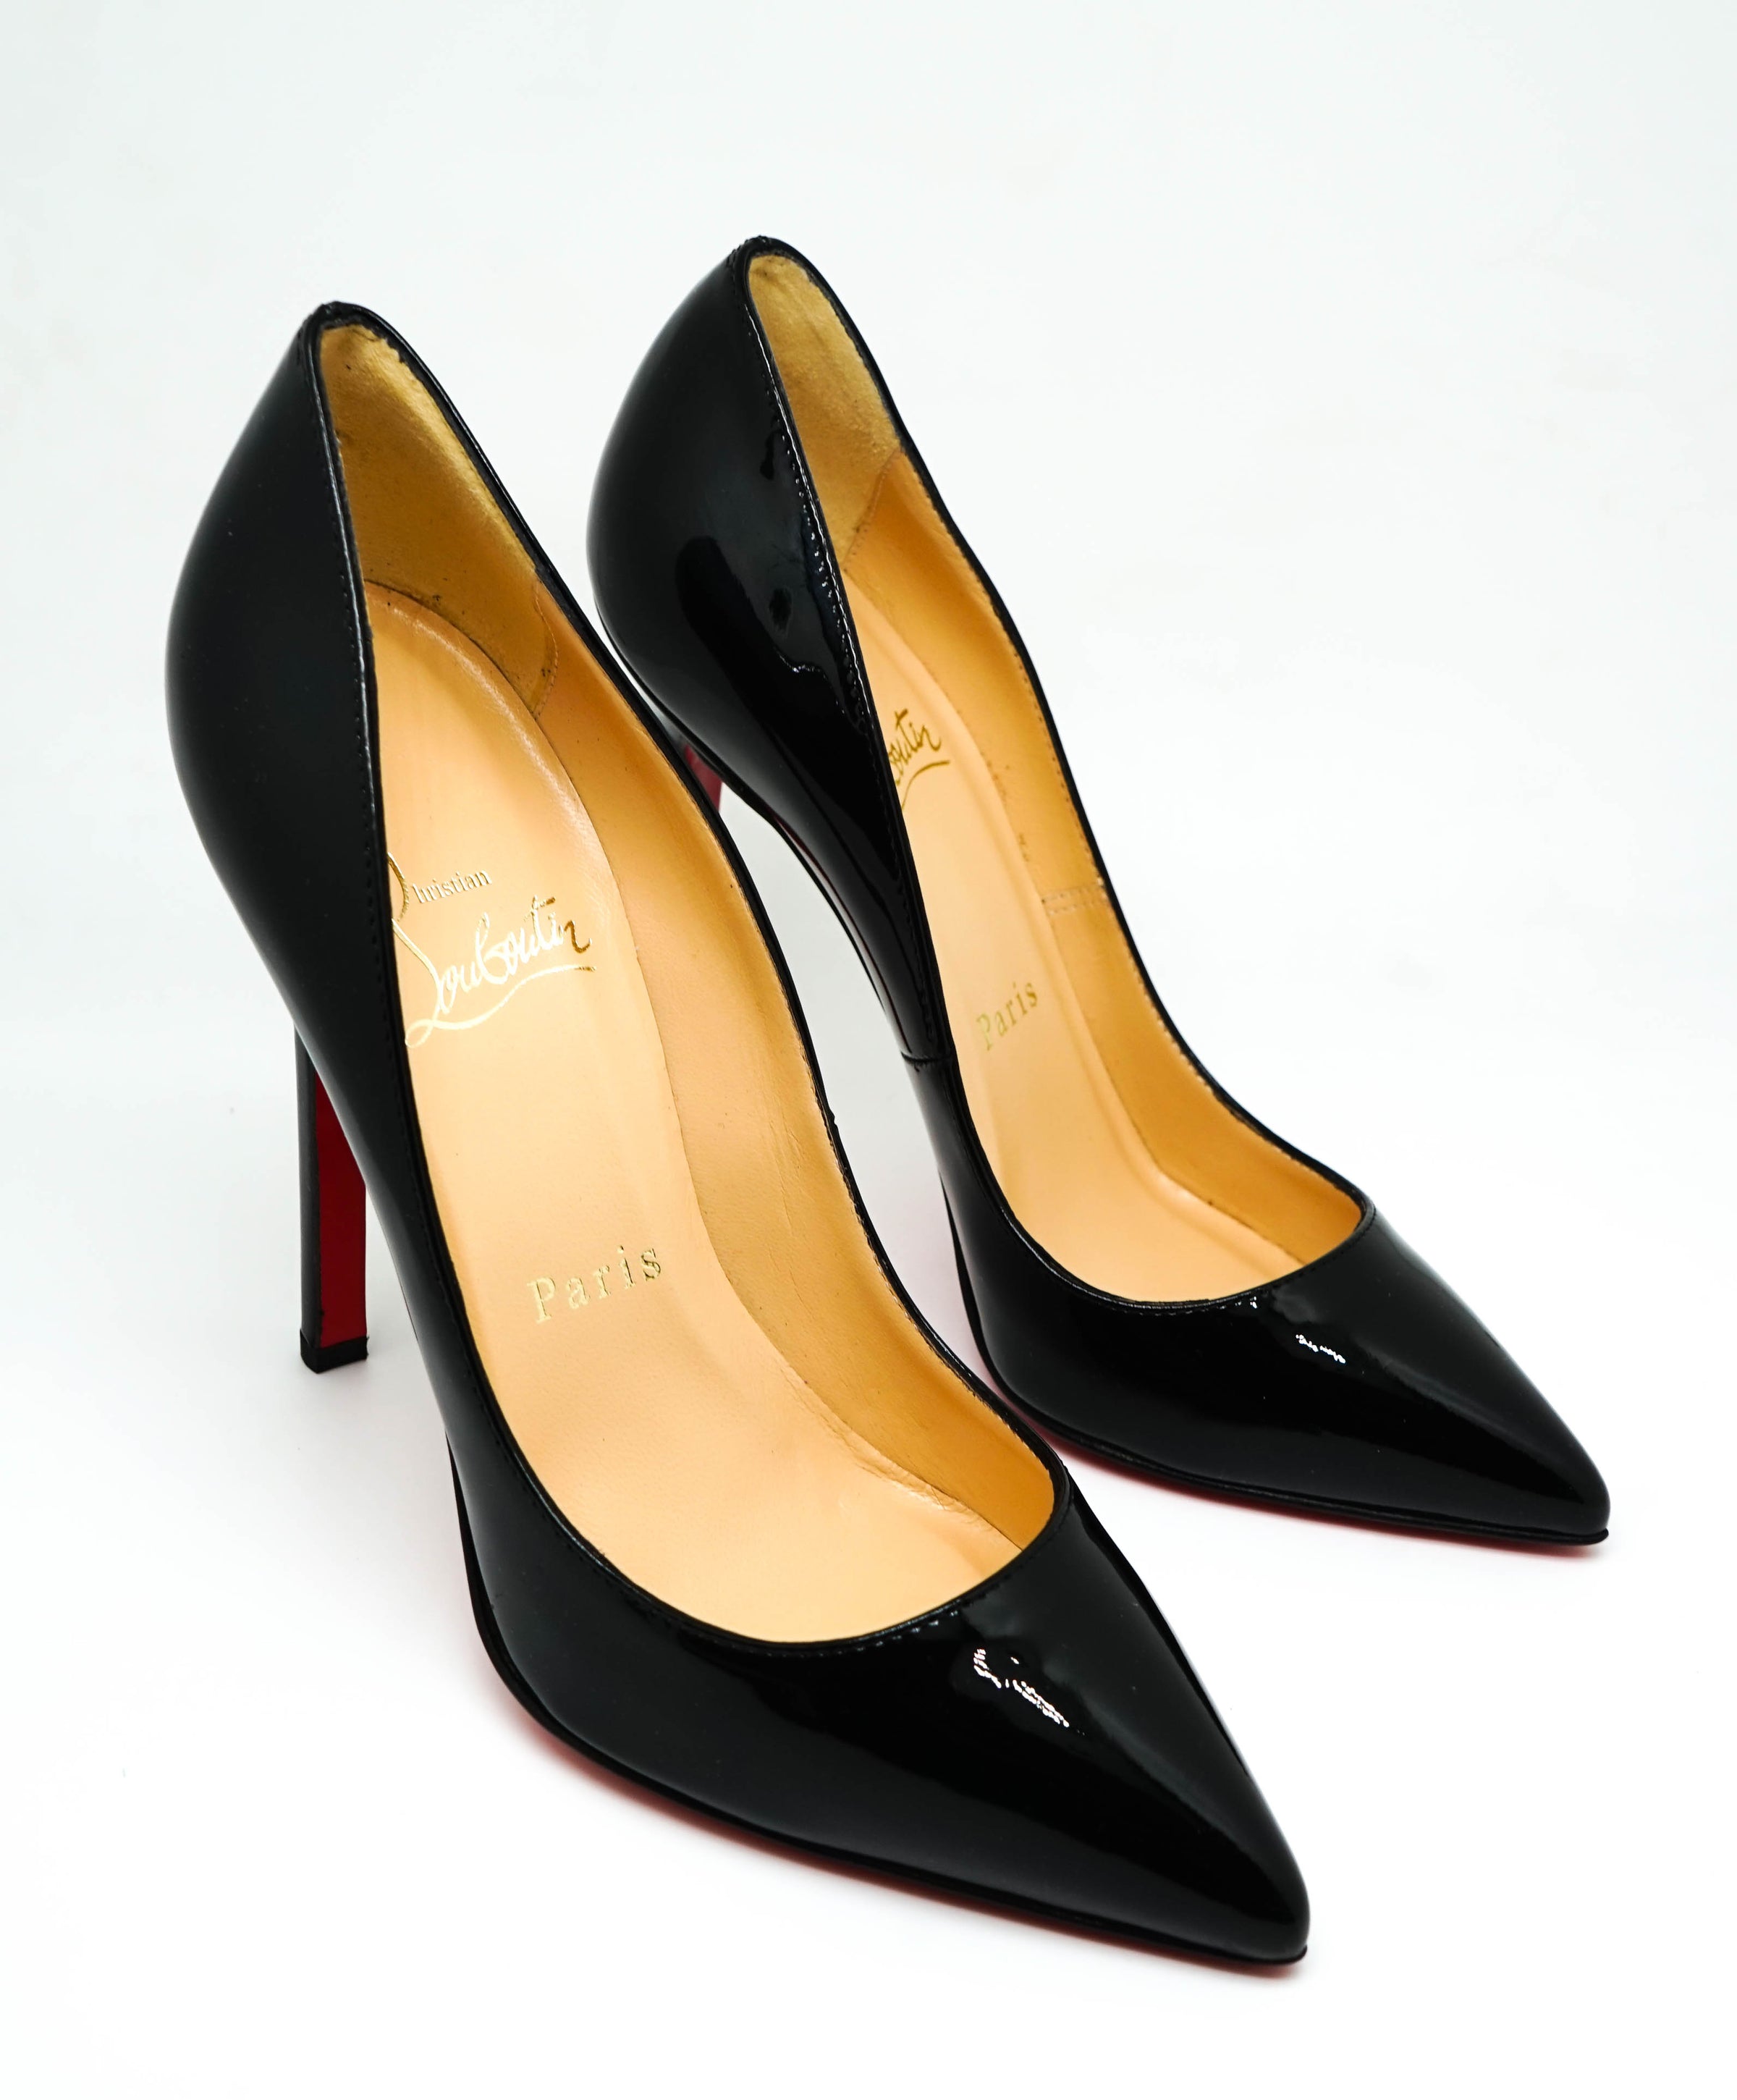 CHRISTIAN LOUBOUTIN 120mm So Kate Patent Leather Pumps - Black